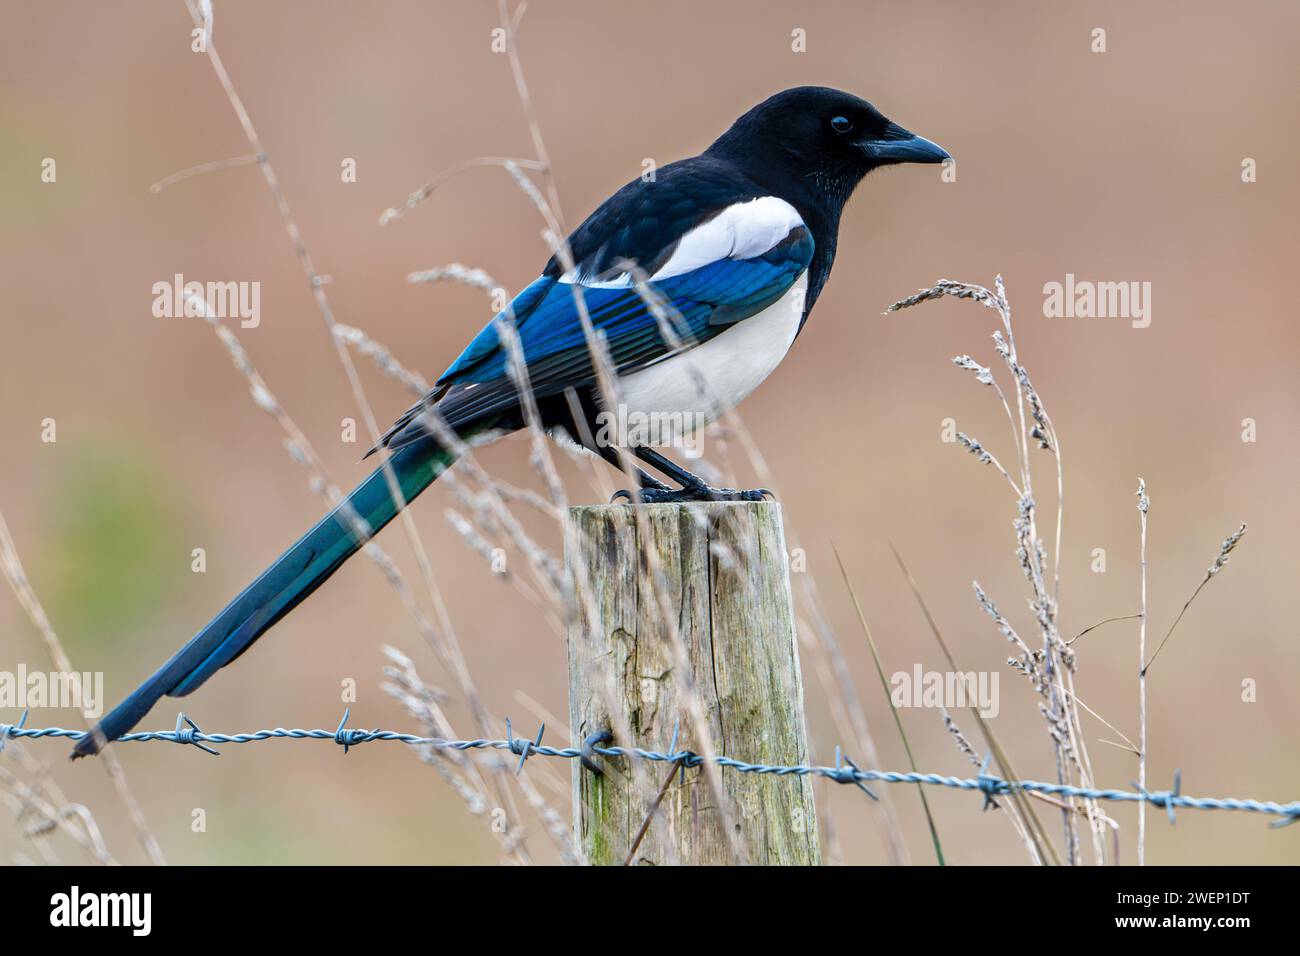 Eurasian magpie / common magpie (Pica pica) perched on fence post with barbed wire along grassland / pasture Stock Photo